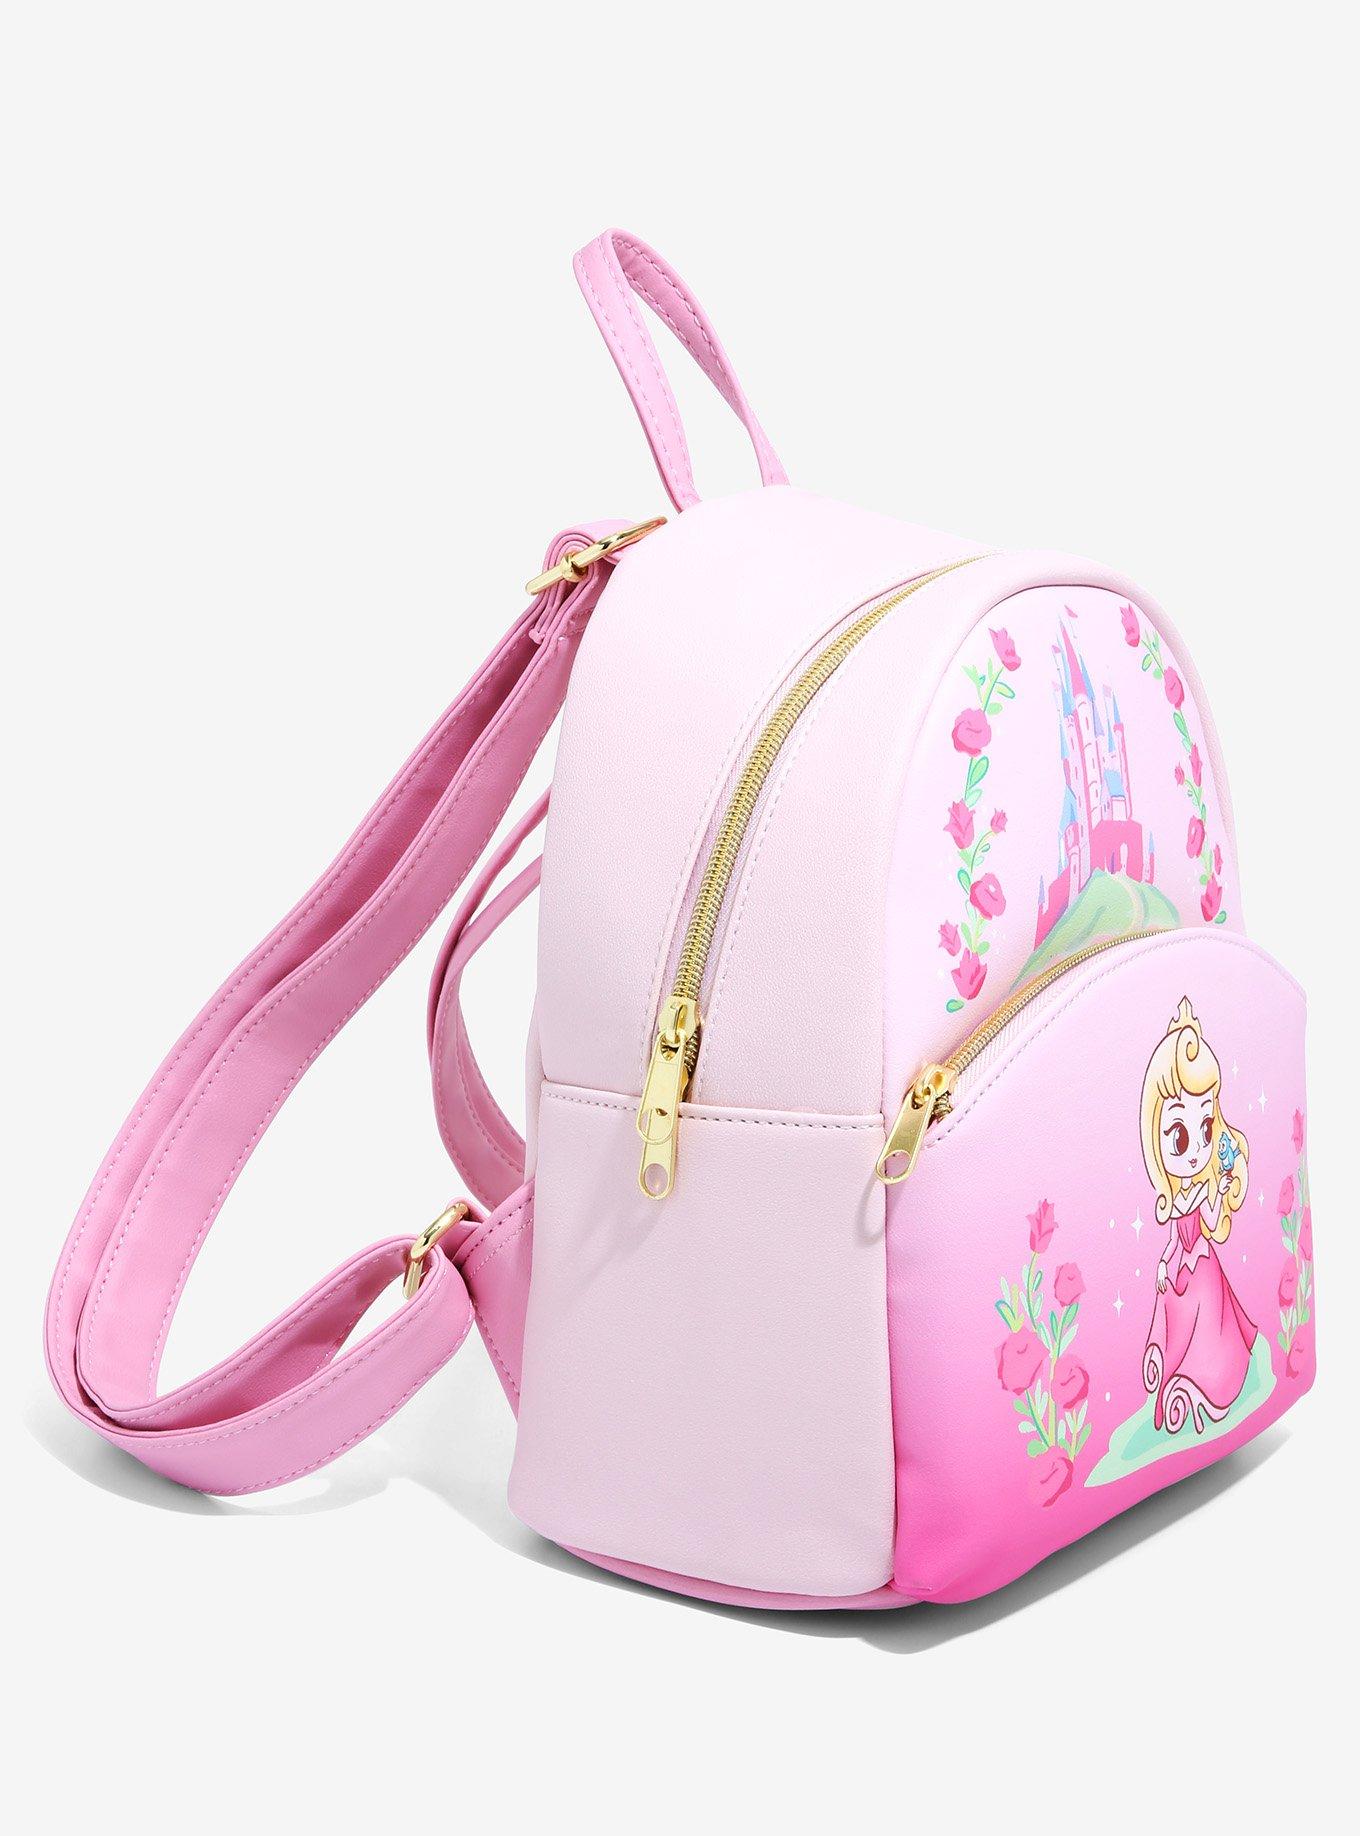 loungefly princess aurora color changing backpack｜TikTok Search